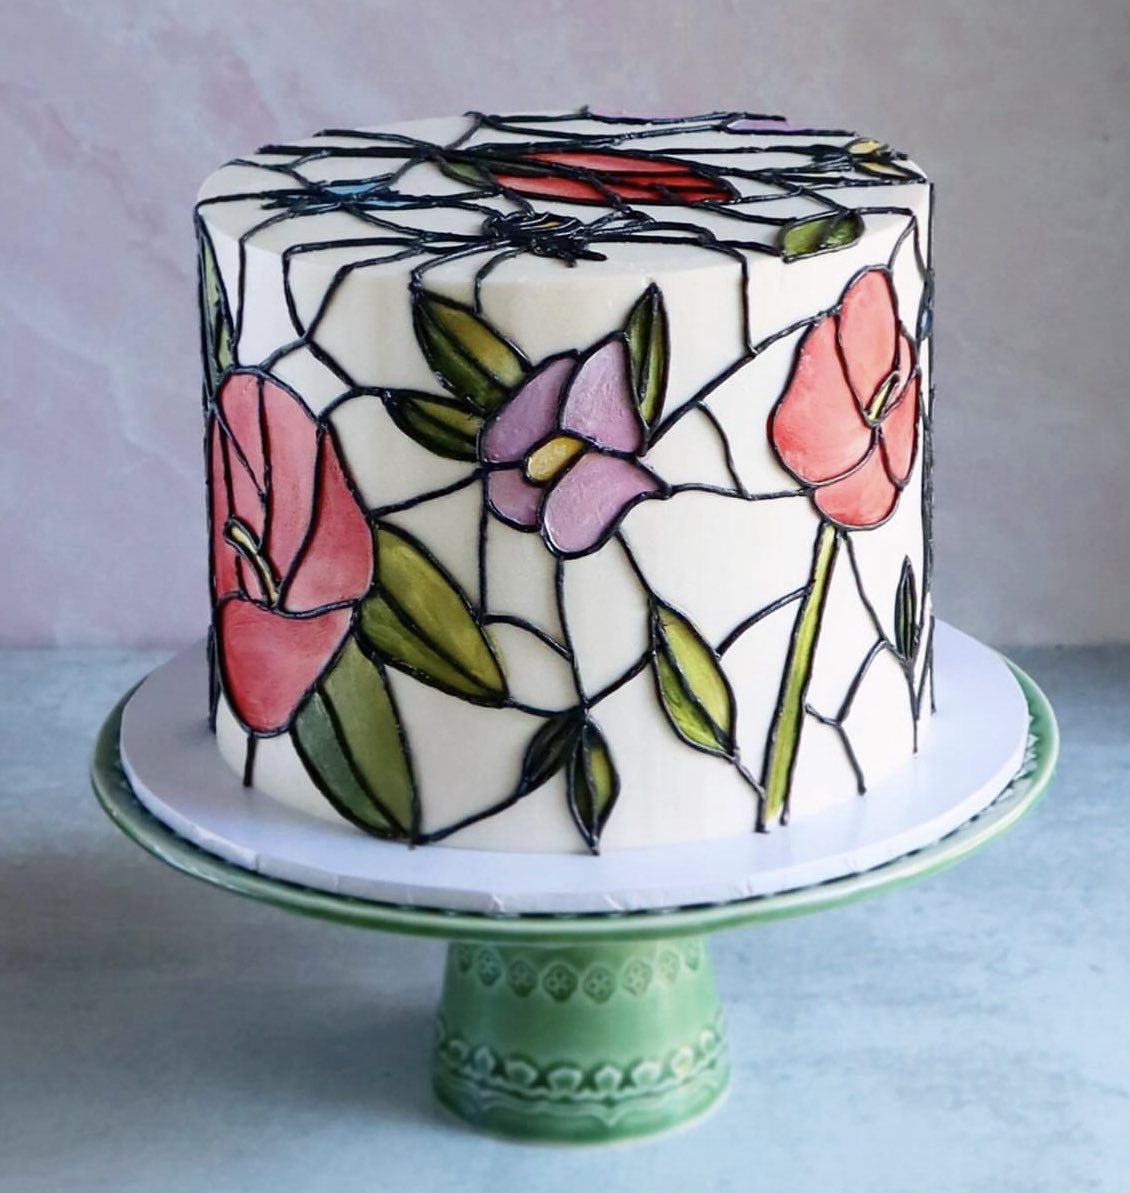 Clever… stained glass cake